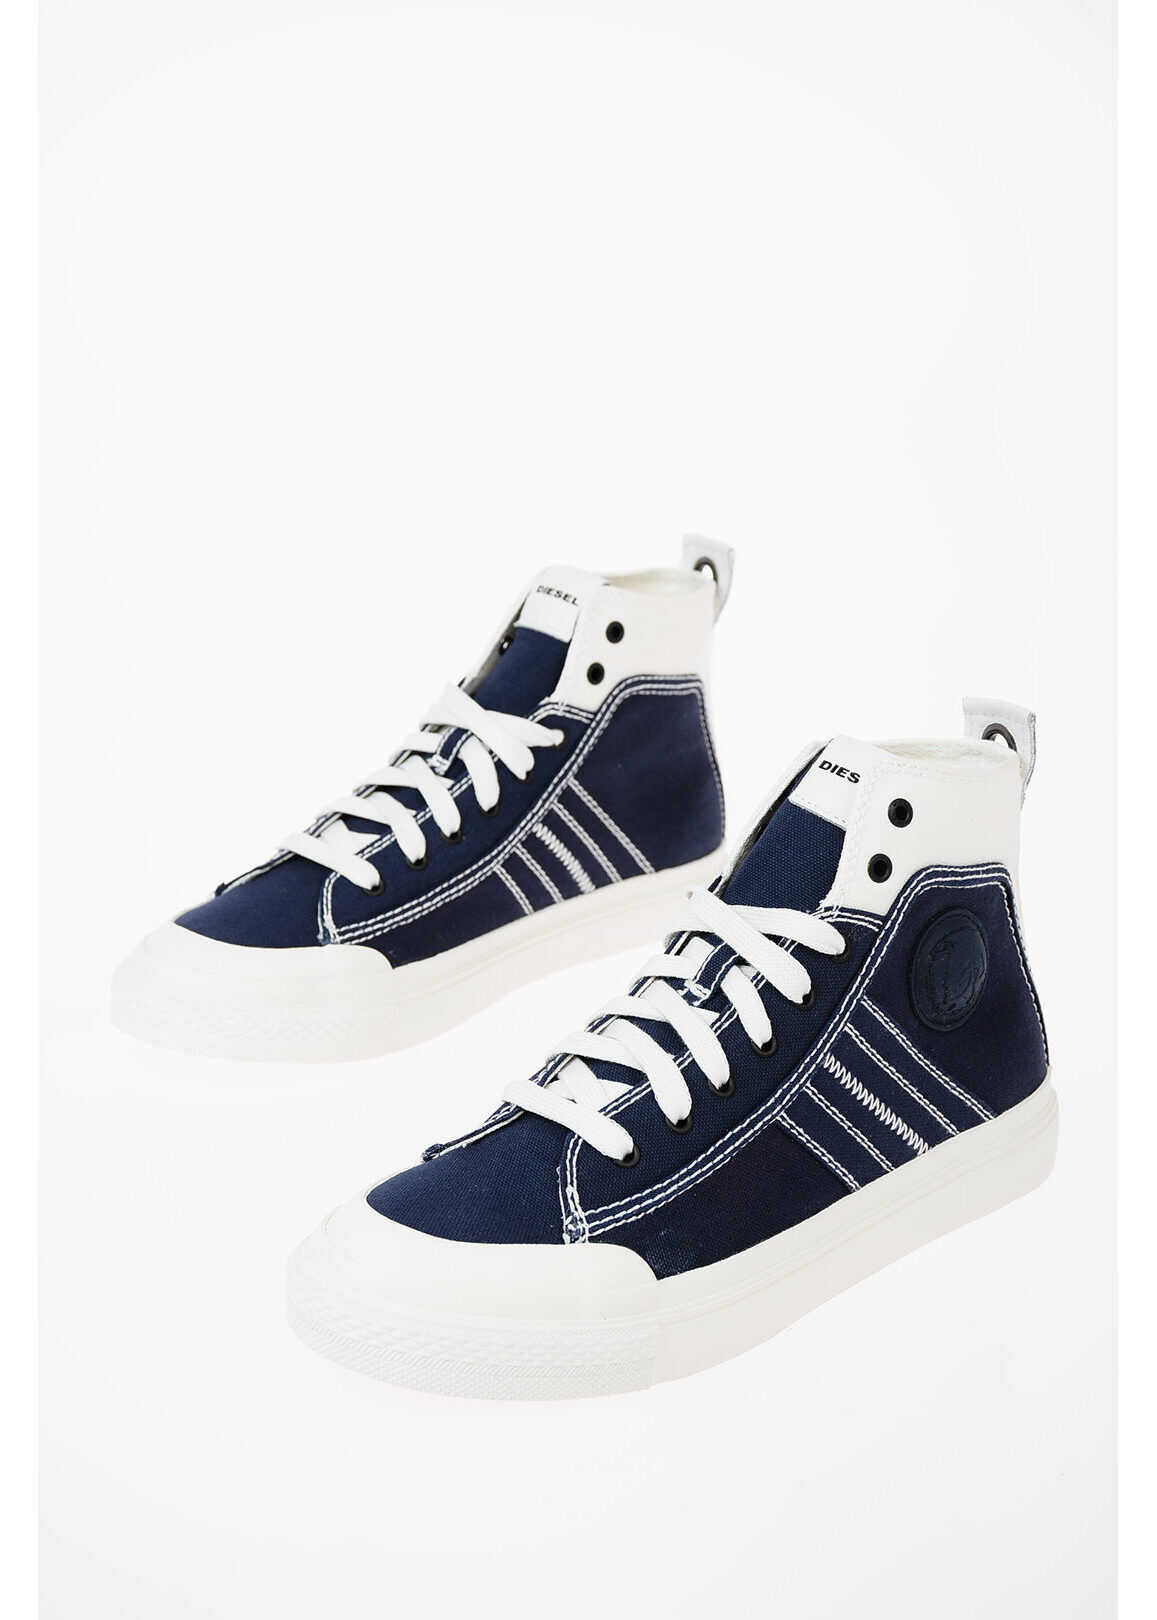 Diesel Fabric ASTICO S-ASTICO MID LACE Sneakers* BLUE